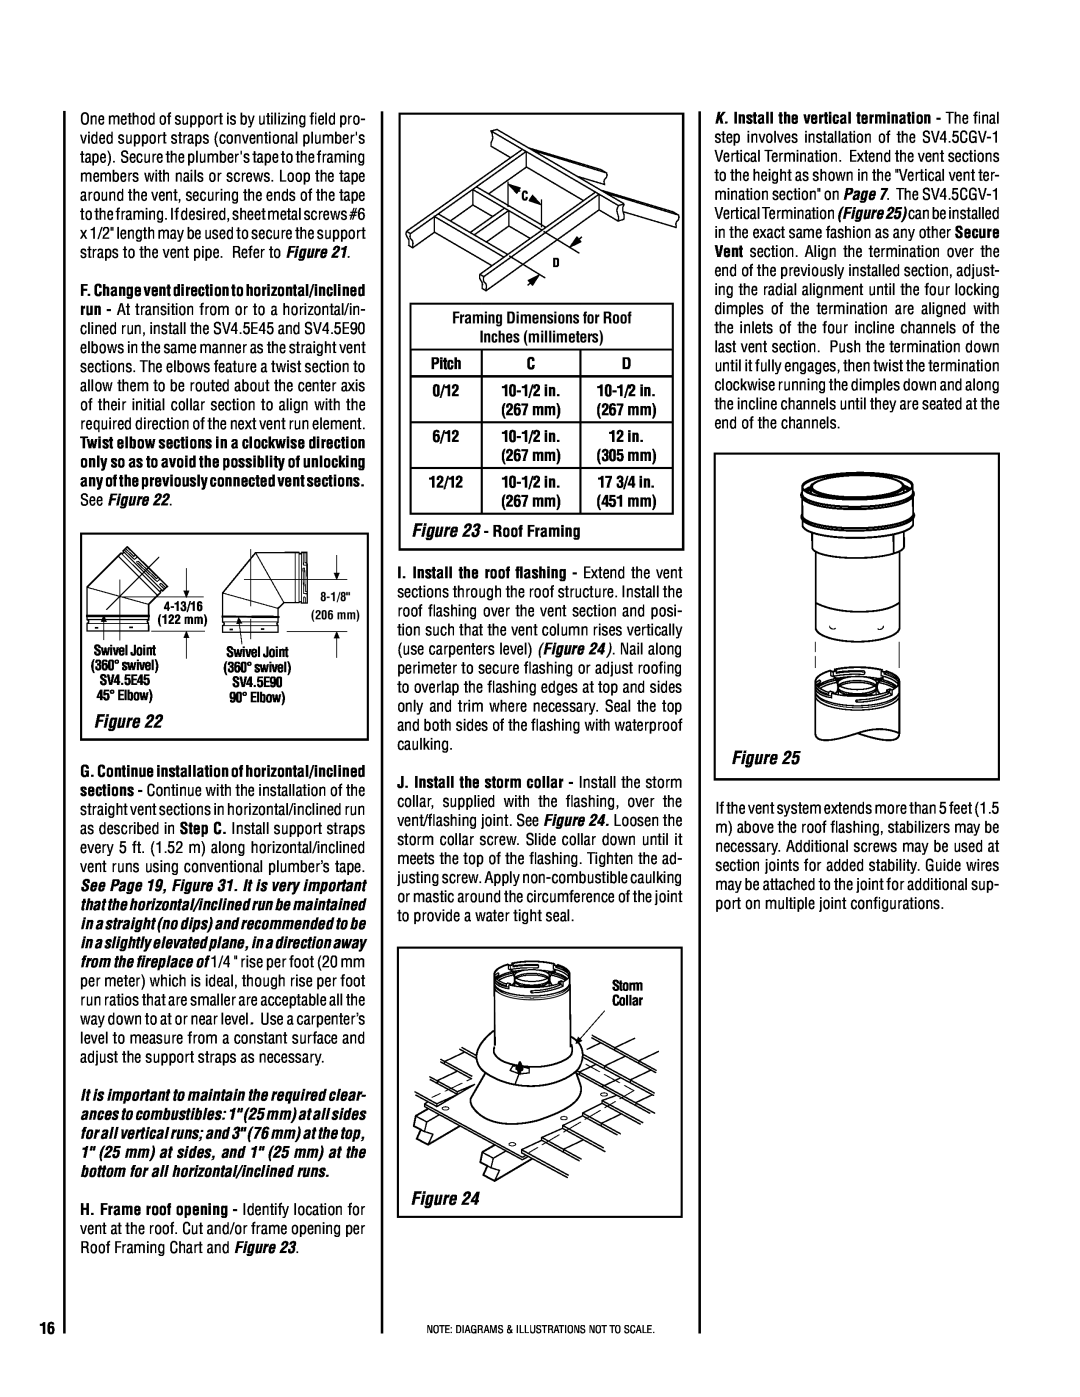 TOA Electronics SSDV-3328 installation instructions Pitch, If the vent system extends more than 5 feet 